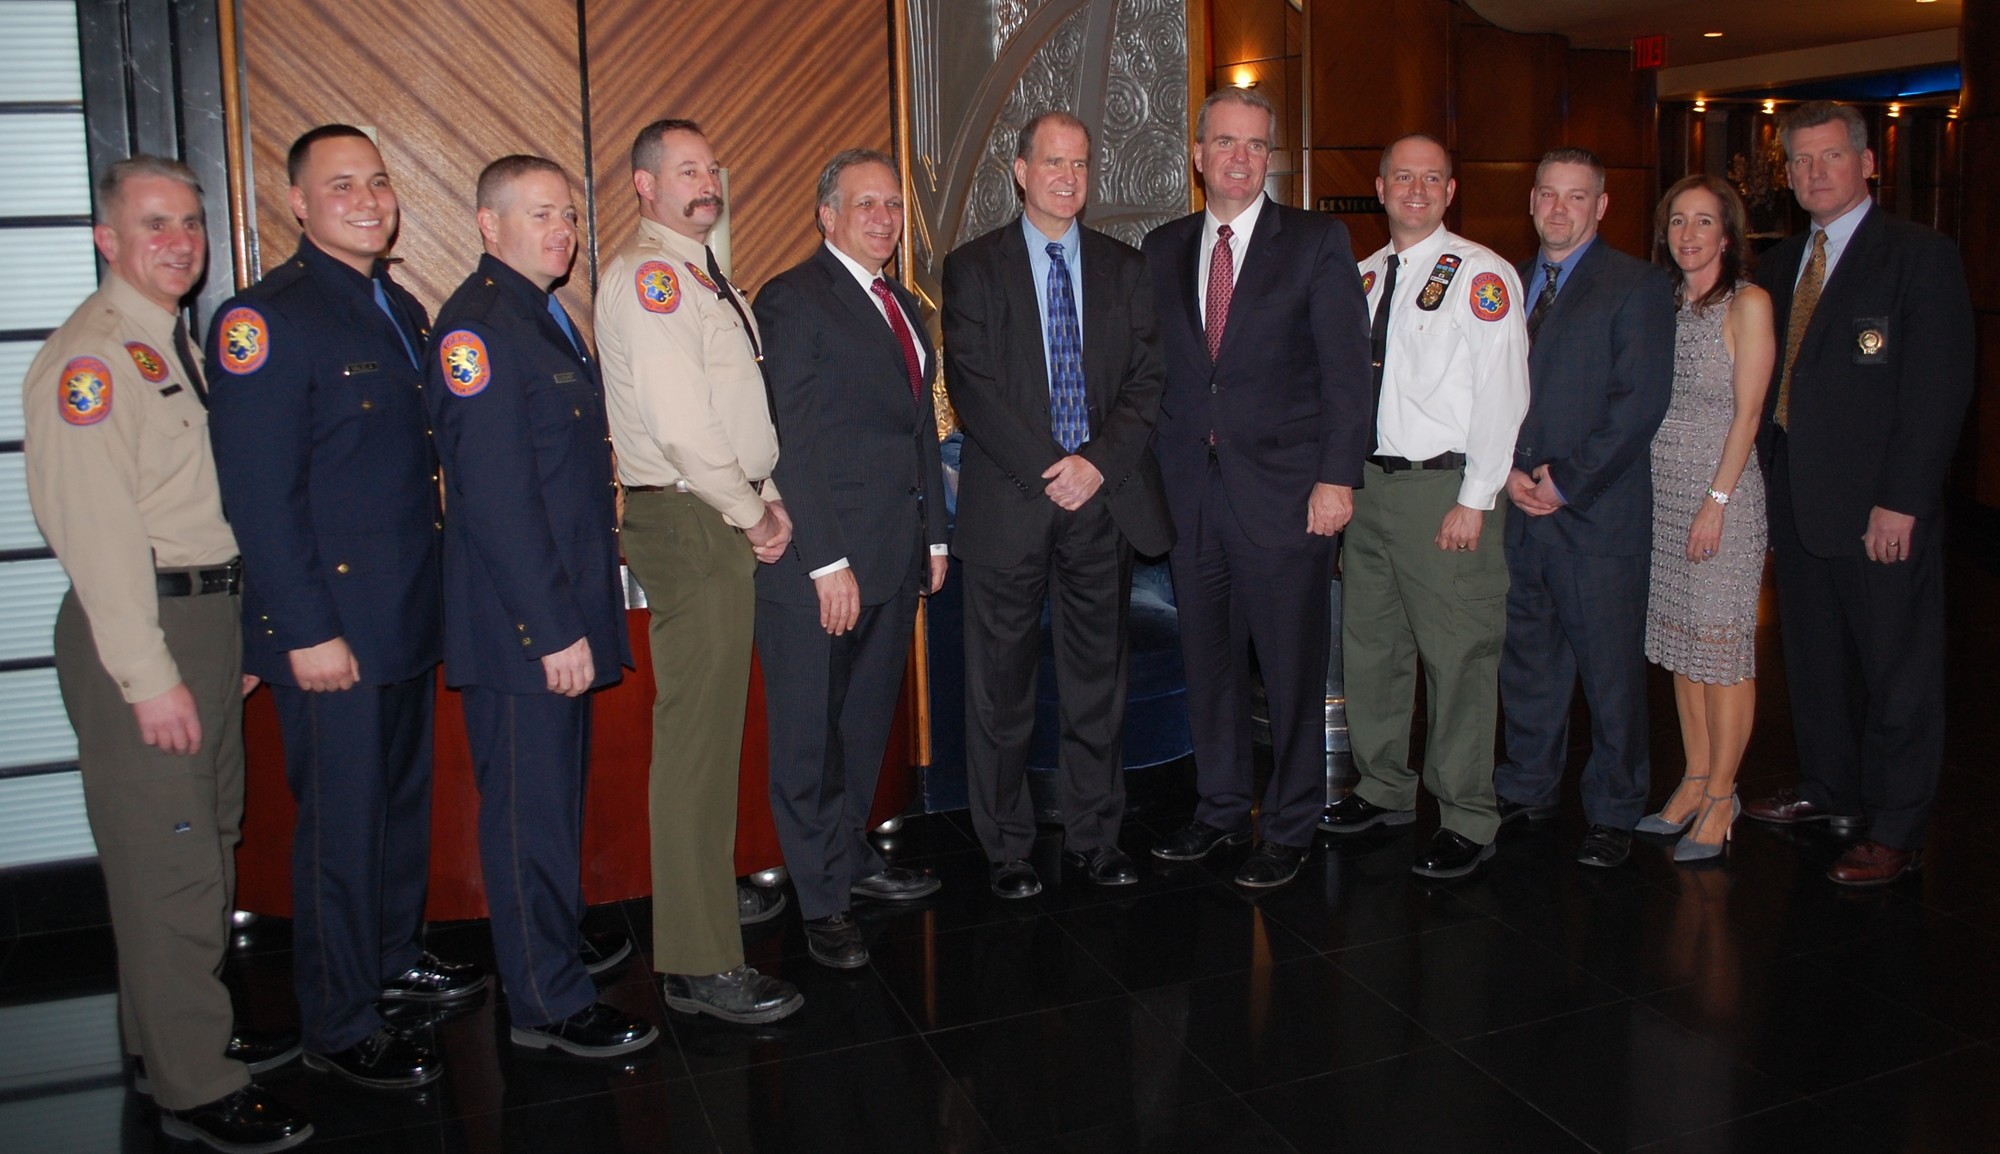 The officers, medics and citizens who saved Terry Twibell, center, were honored by Nassau County Executive Ed Mangano and Acting Police Commissioner Thomas Krumpter on March 9 at Chateau Briand in Carle Place.